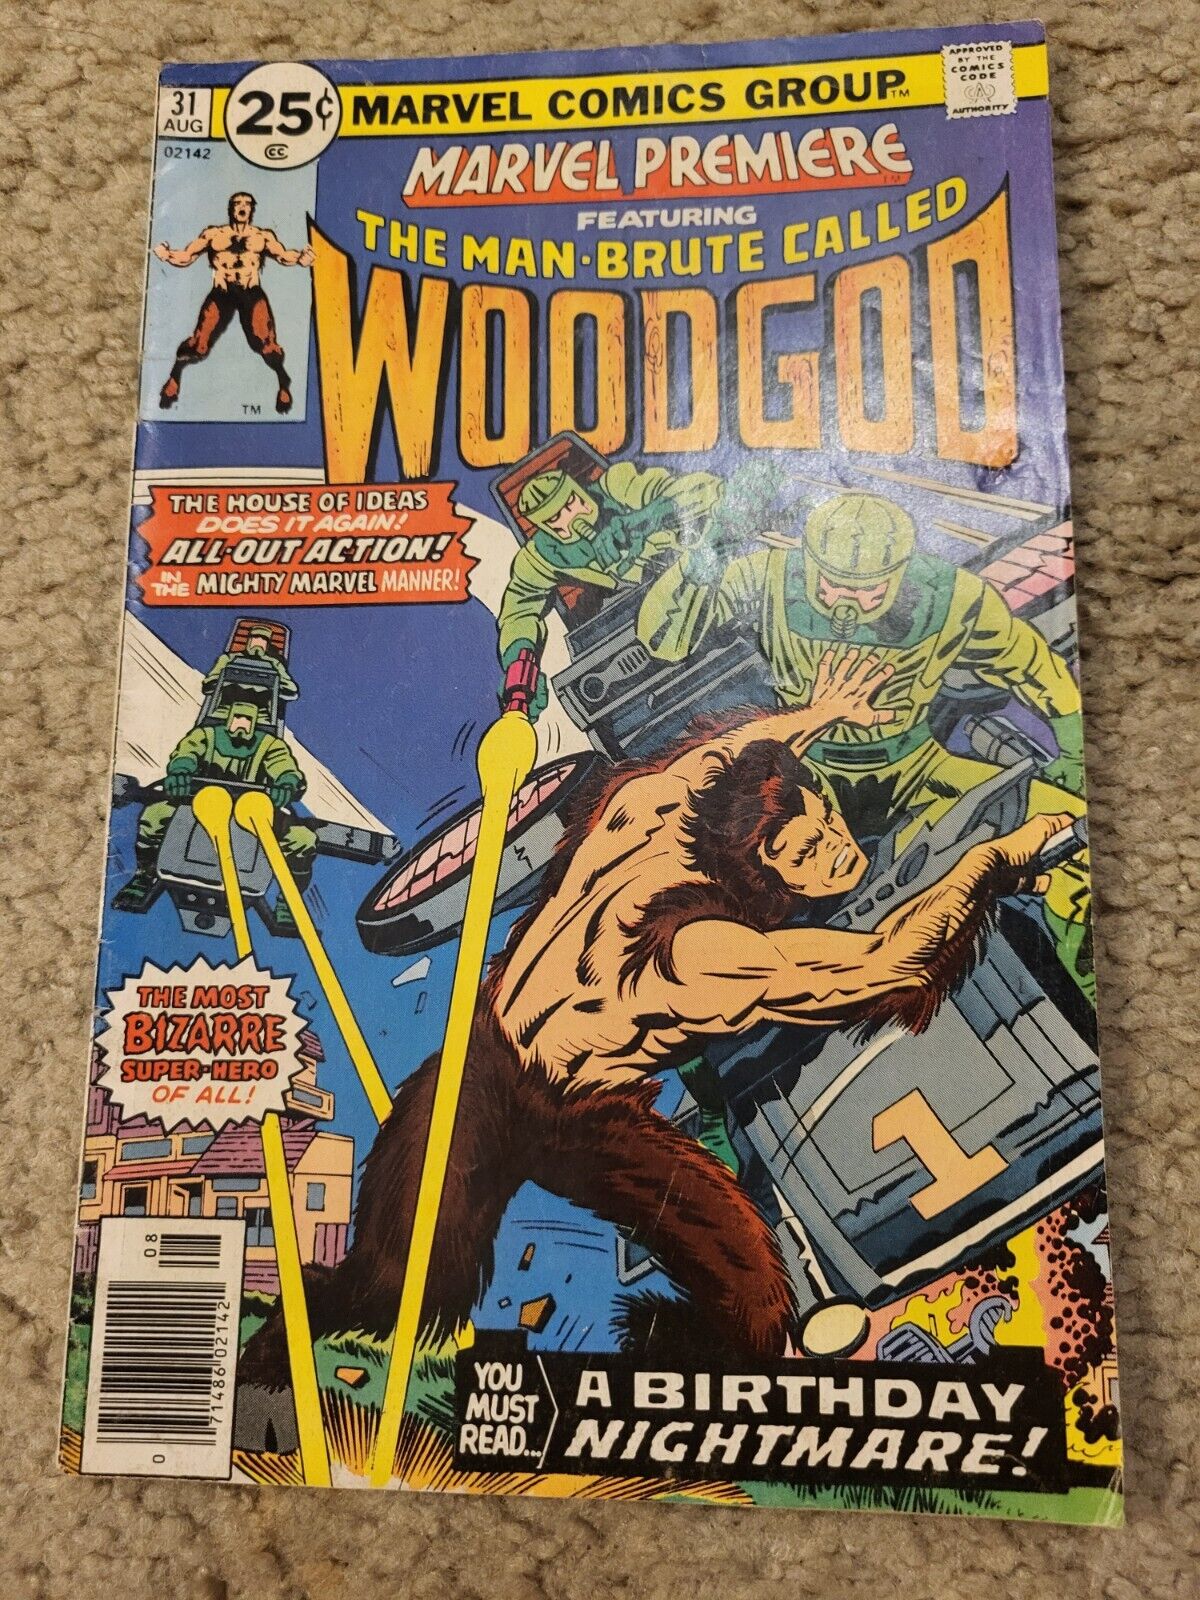 MARVEL PREMIERE 31 featuring THE MAN-BRUTE CALLED WOODGOD 1976